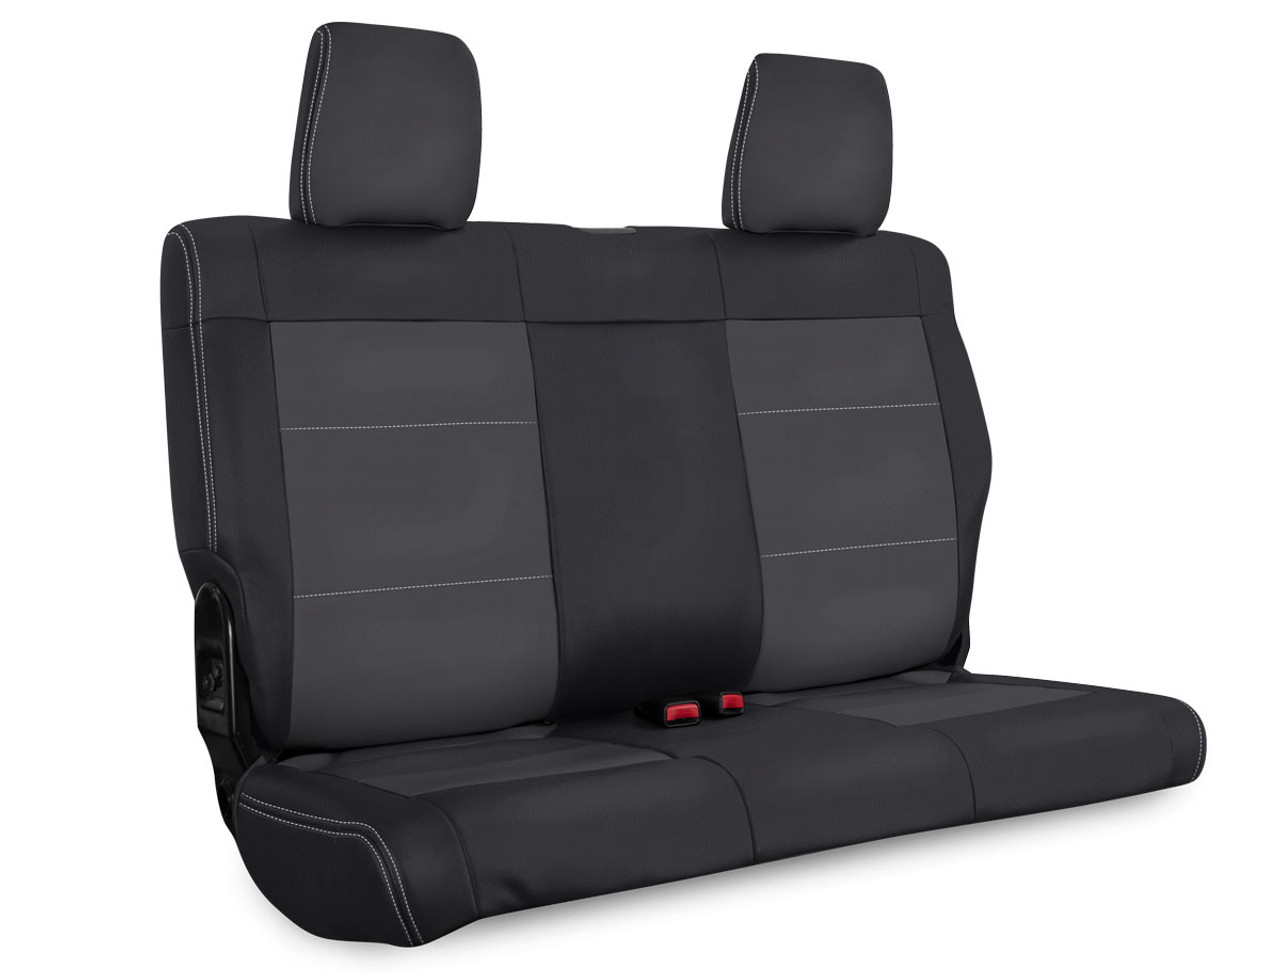 Rear Seat Cover for '07'10 Jeep Wrangler JK, 2 door - Black and grey